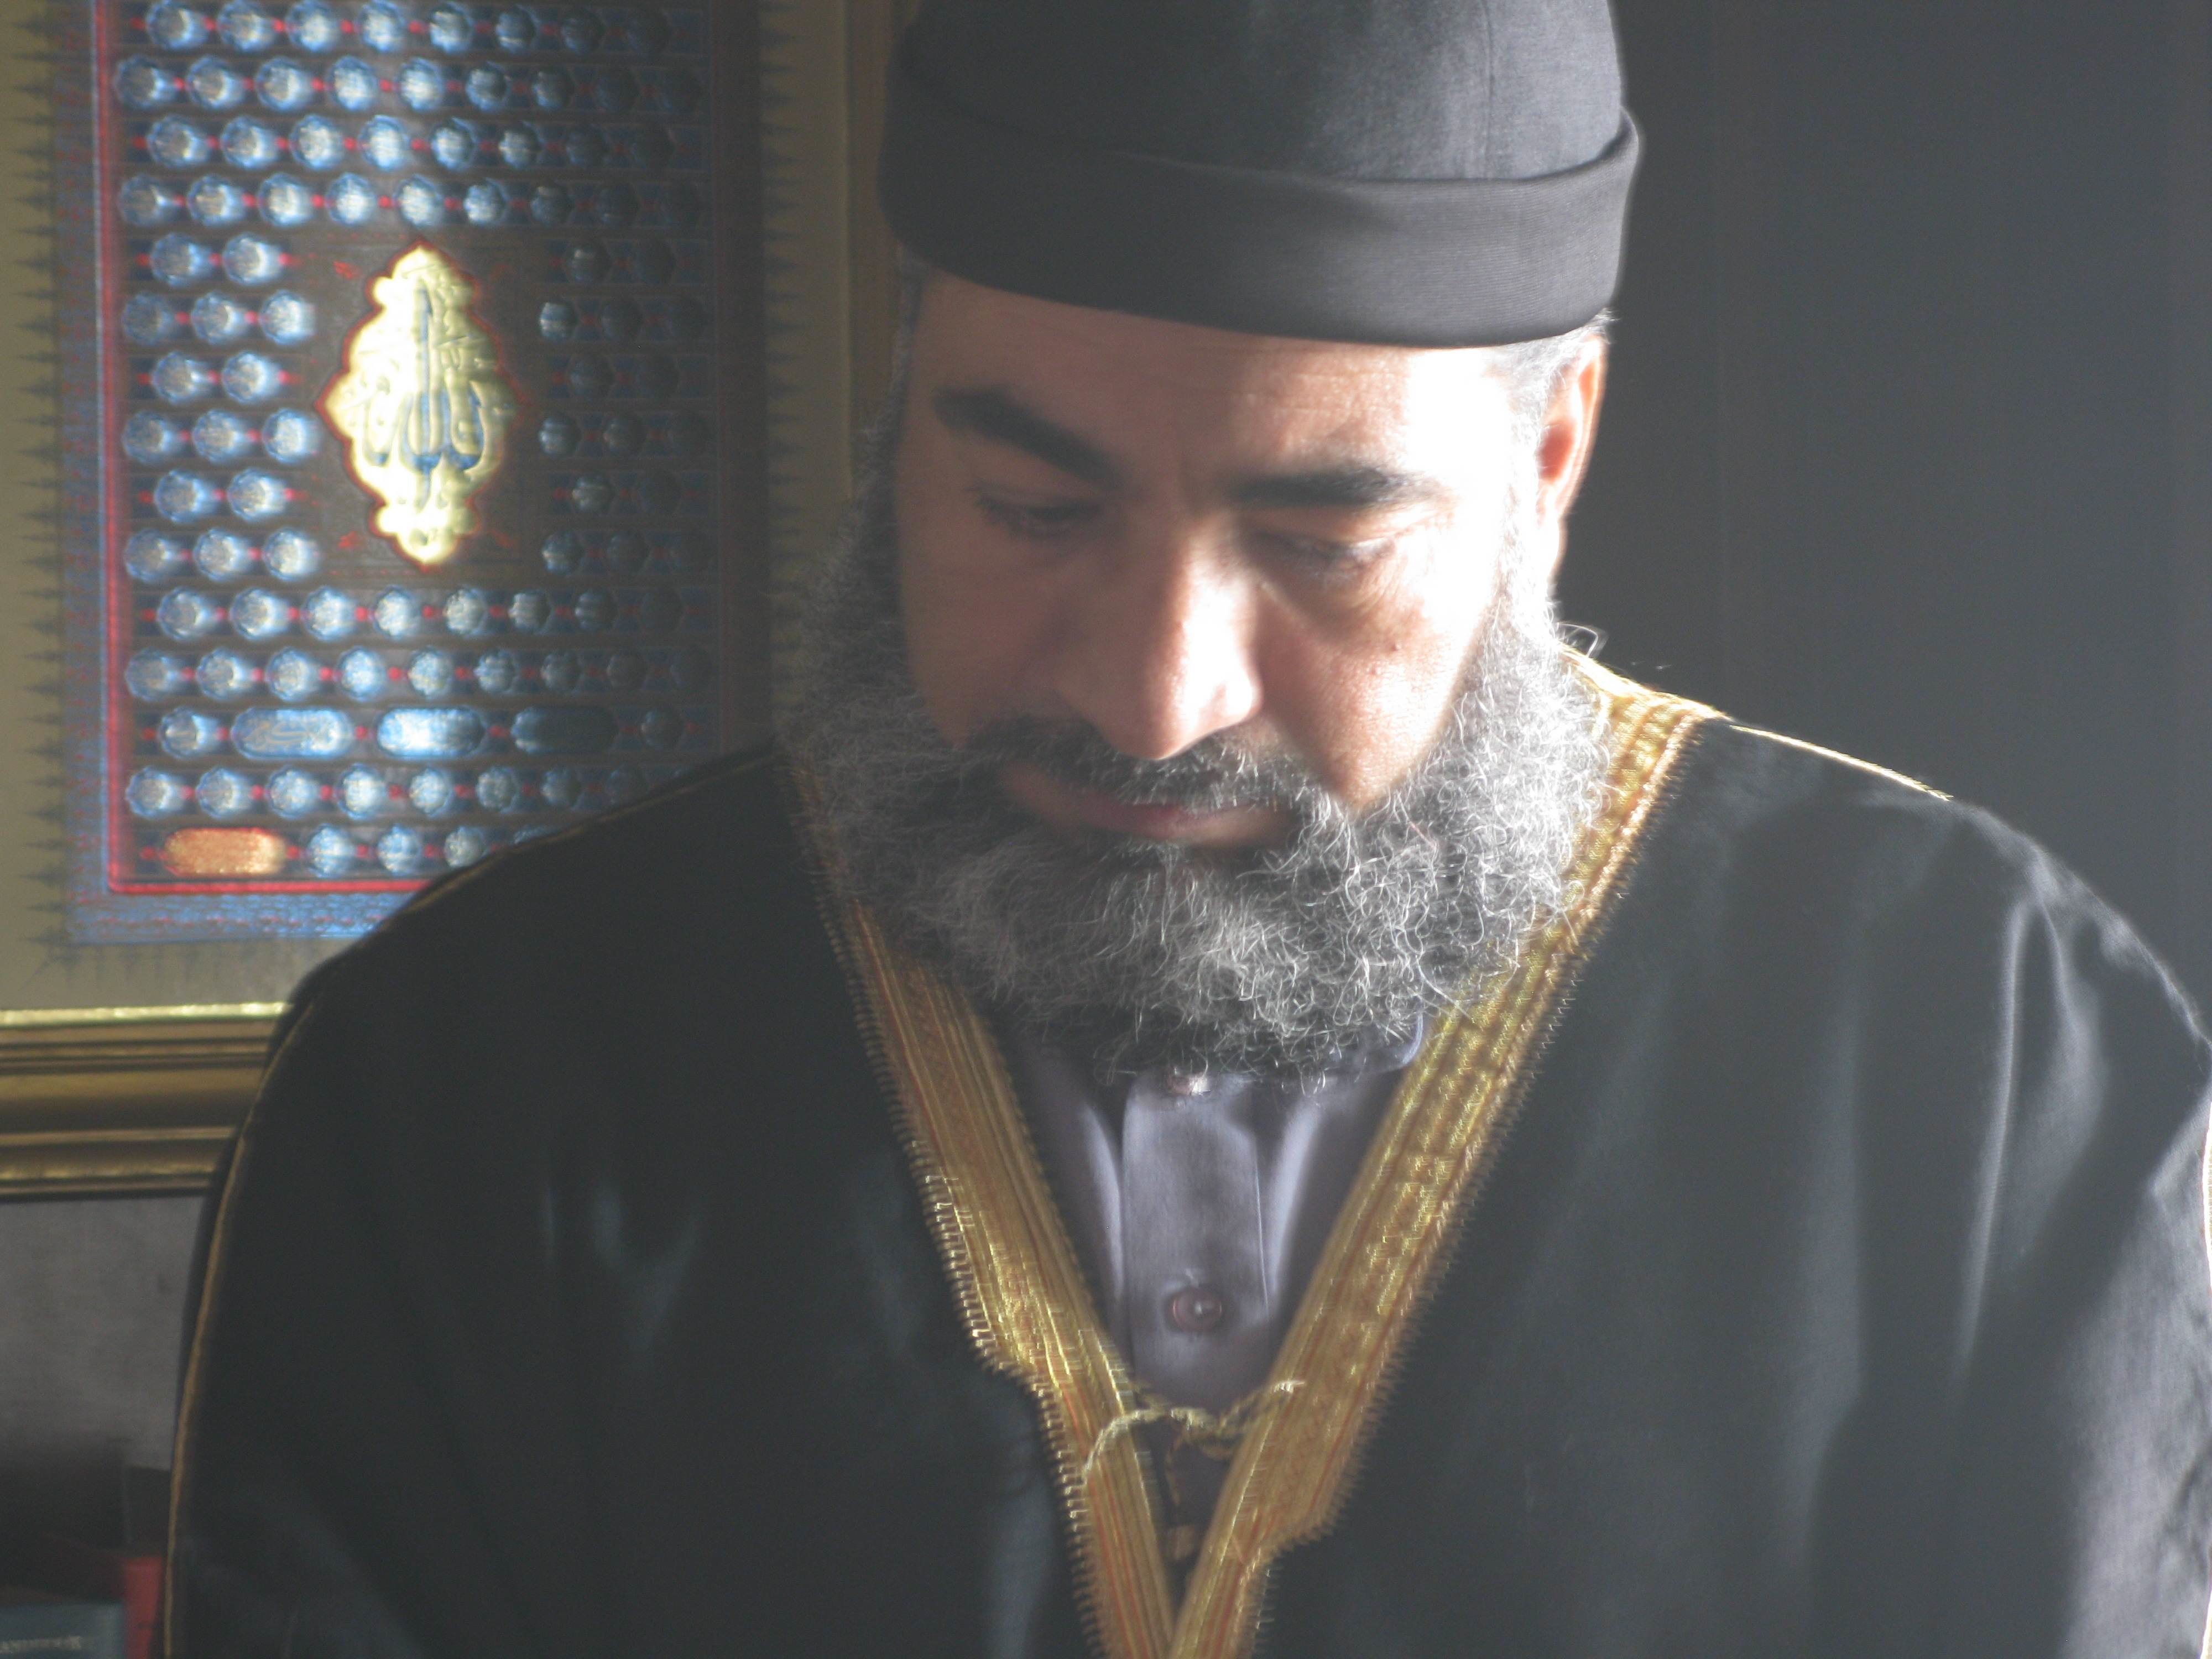 Sayed Badreya in the film The Space Between